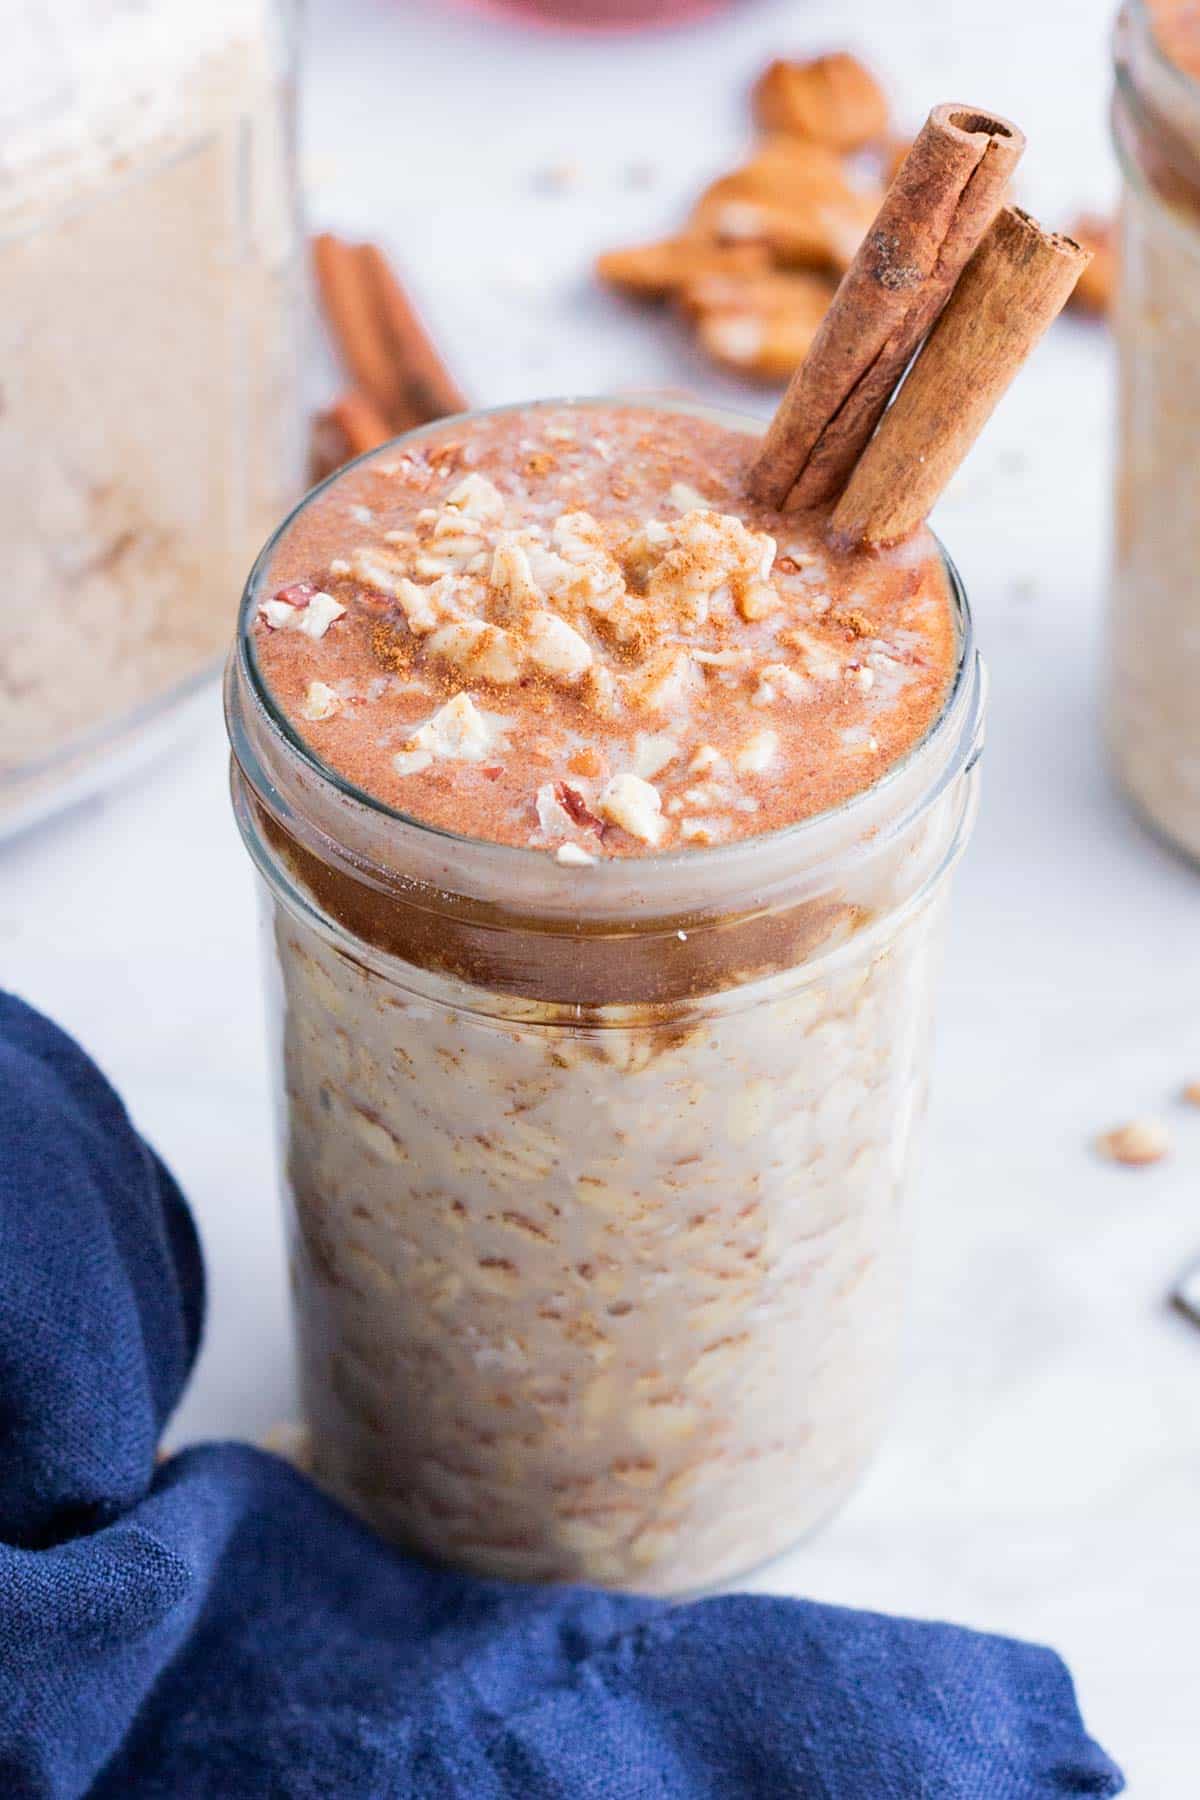 Cinnamon sticks are added to the jar with maple brown sugar oatmeal.